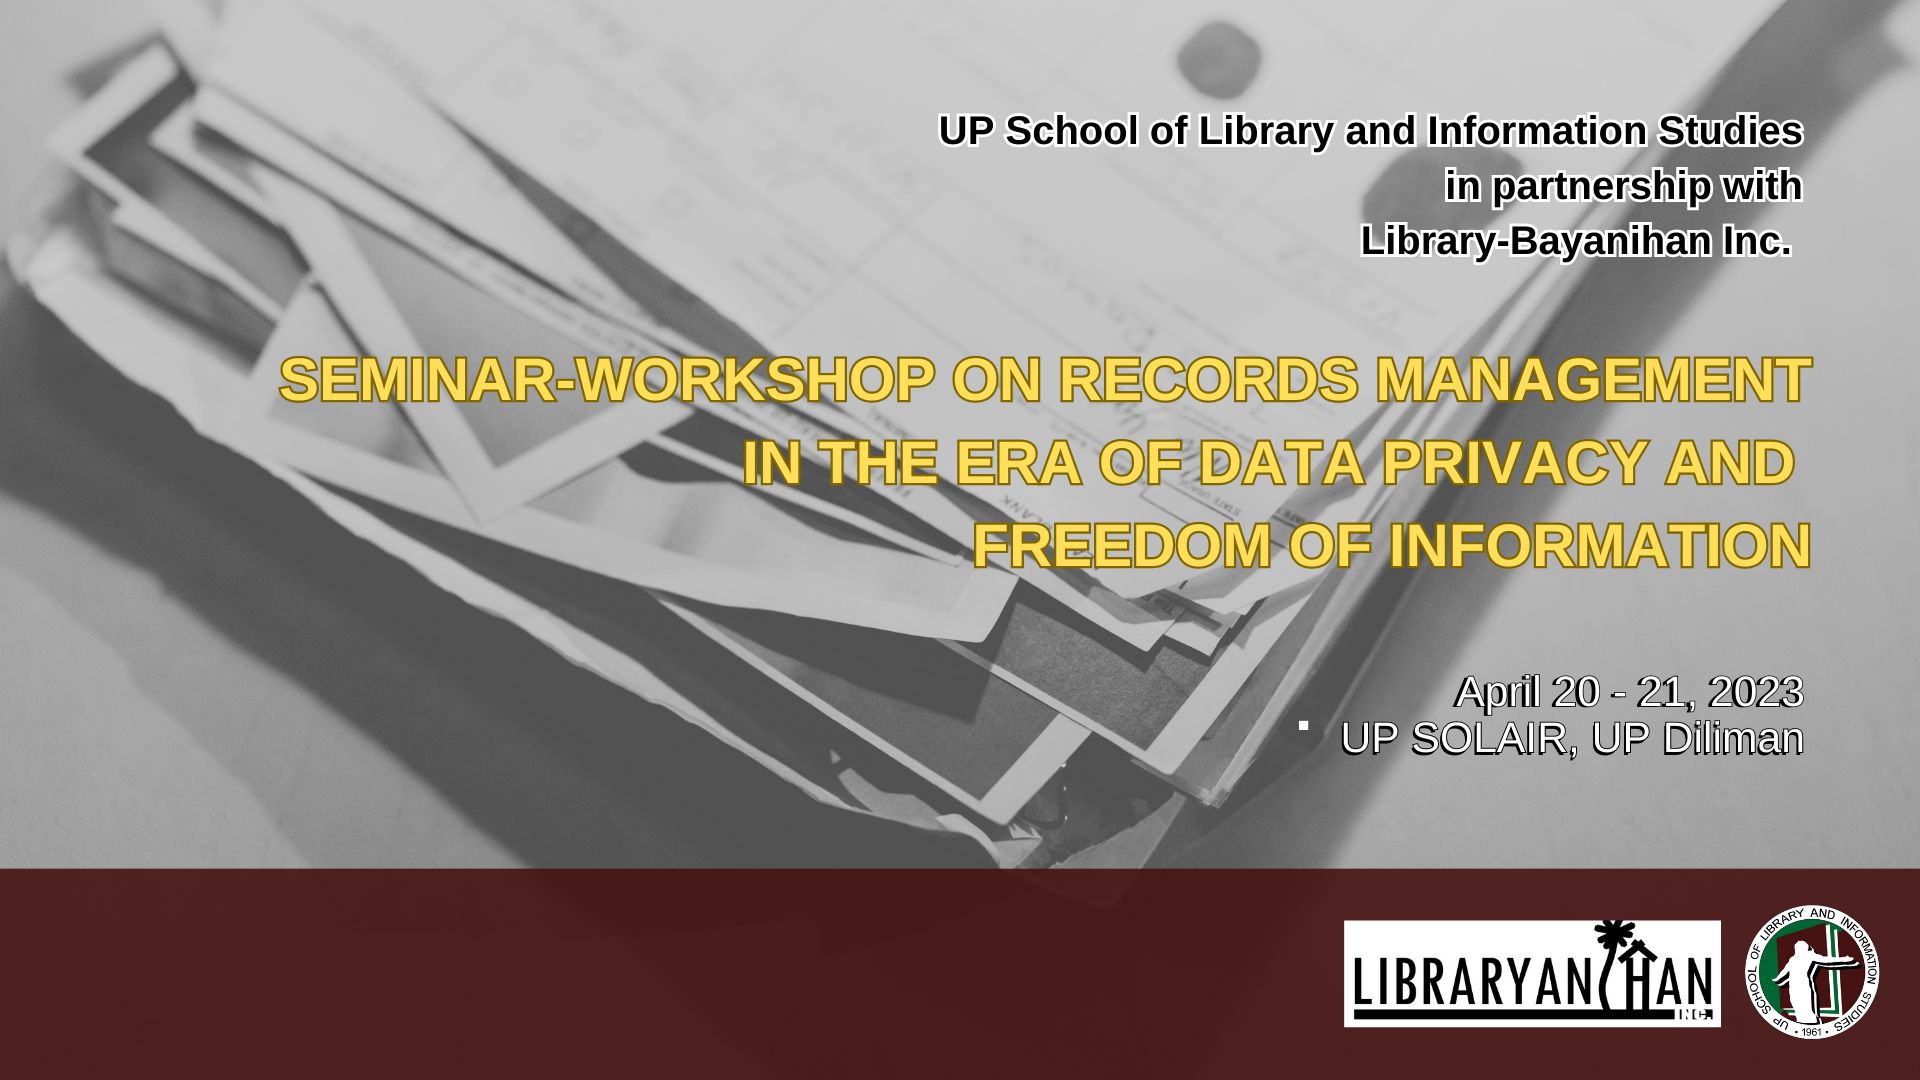 Seminar-Workshop on Records Management in the Era of Data Privacy and Freedom of Information